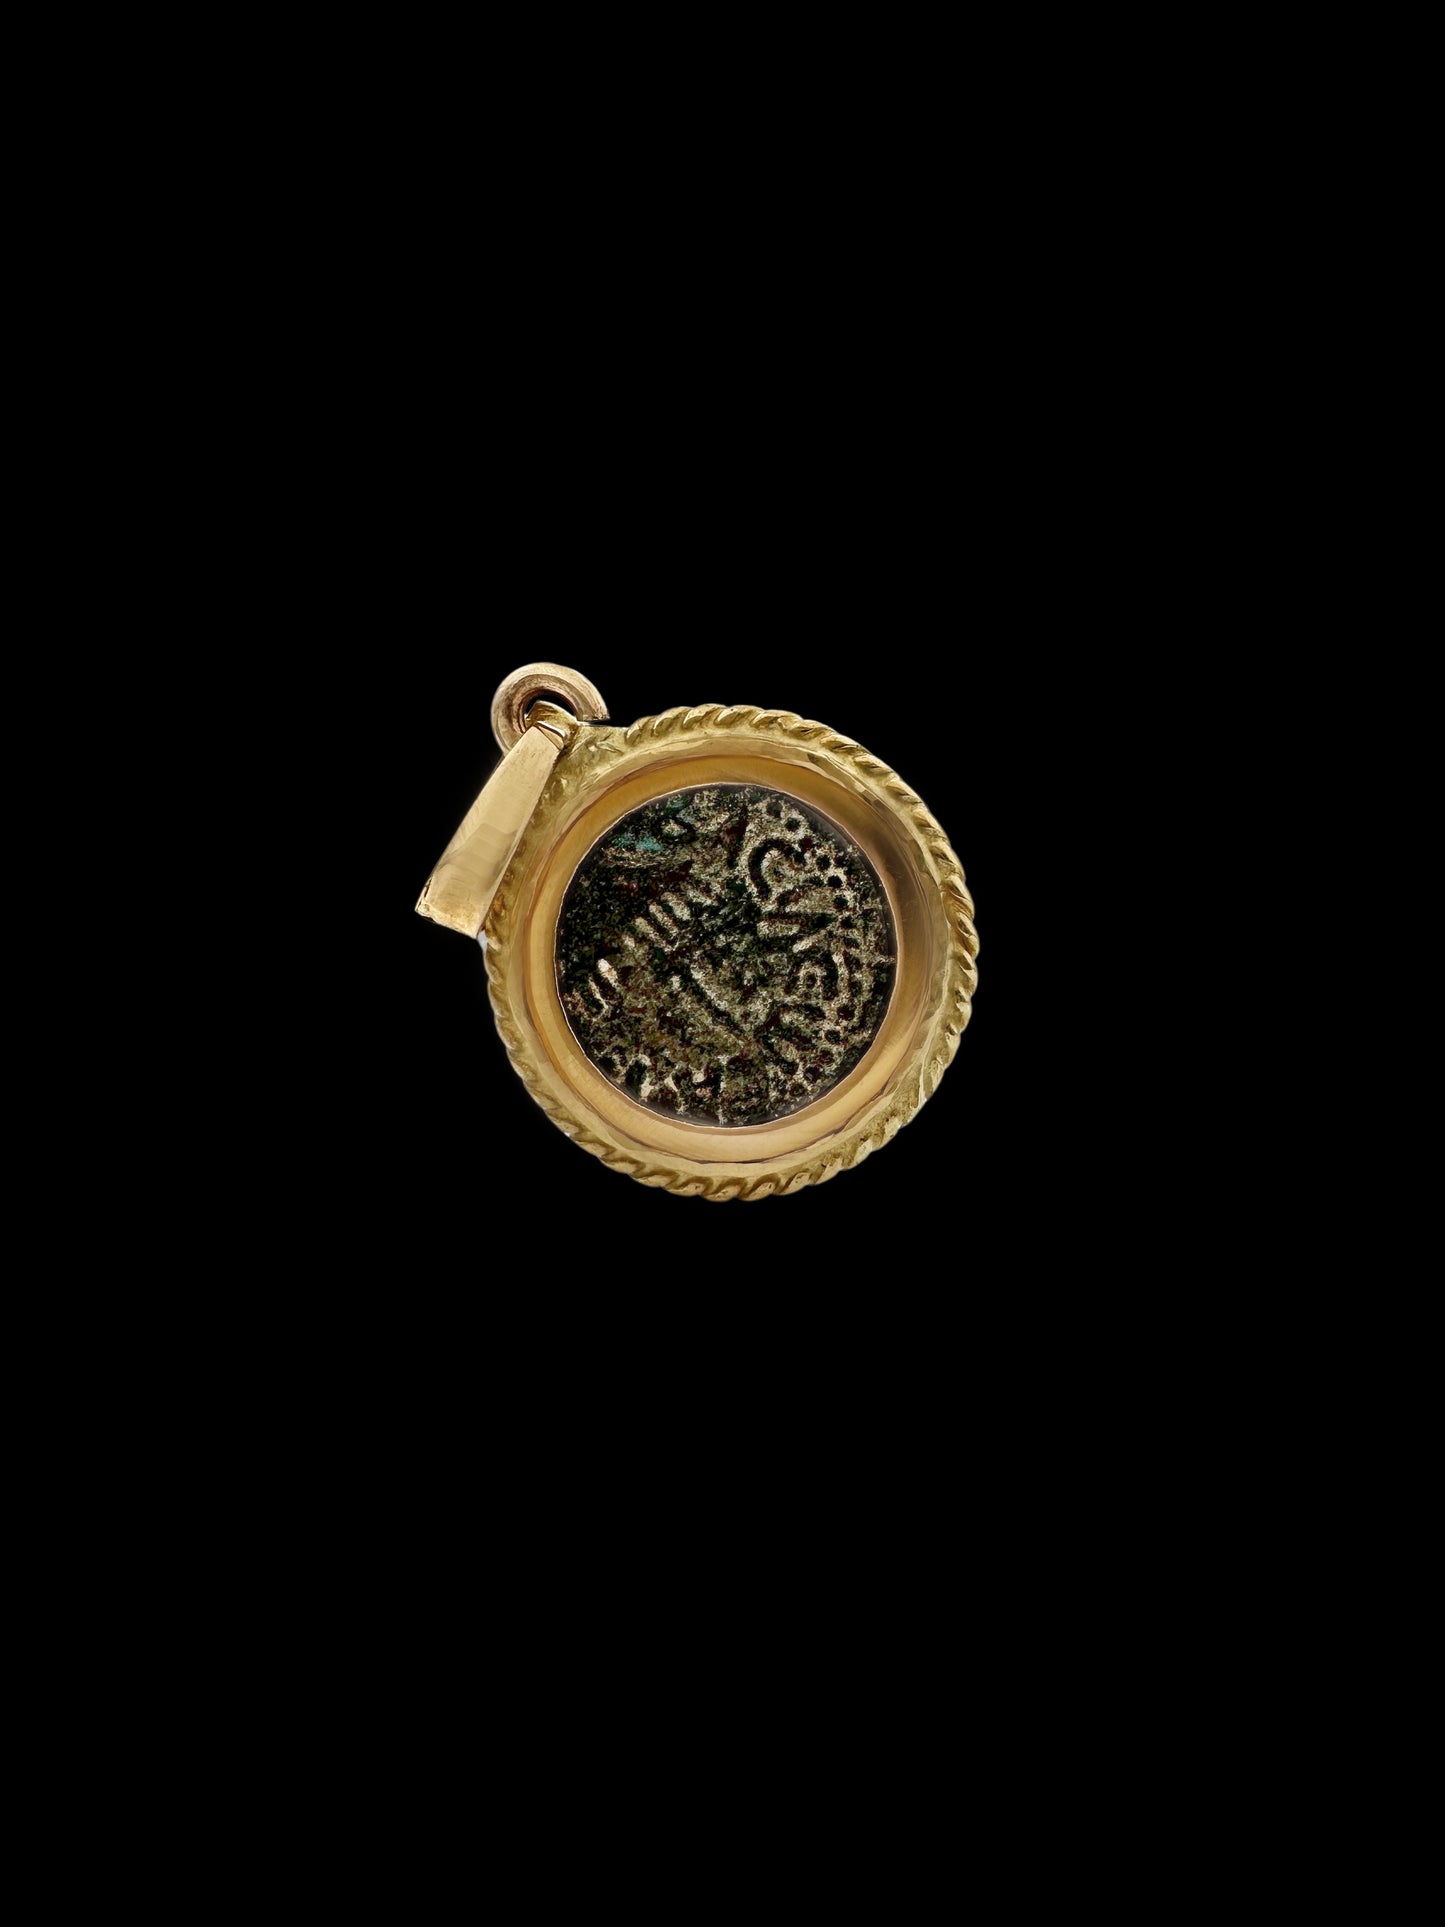 Ancient Herod Agrippa Coin Set in Woven 14K Gold Pendant